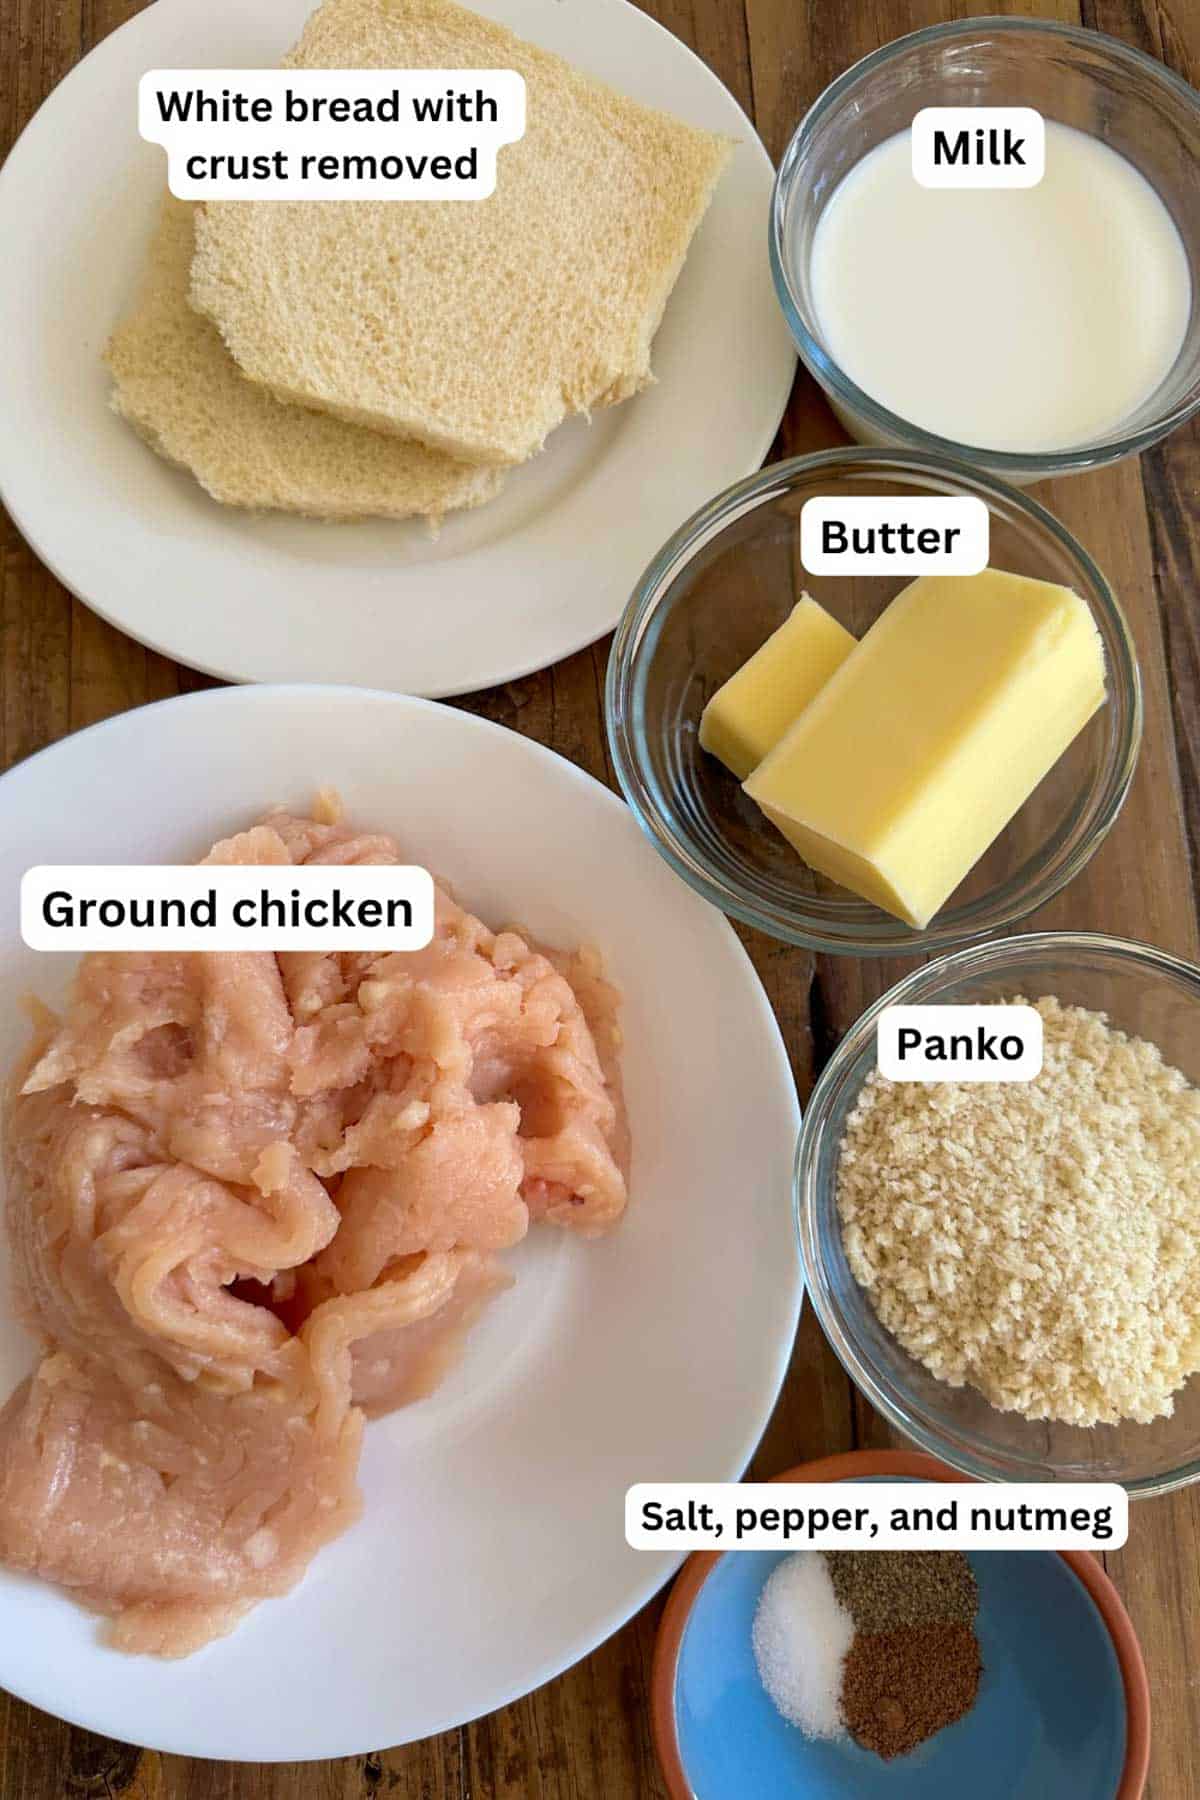 Ingredients for ground chicken cutlets displayed including white bread slices with crust removed, ground chicken, milk, butter, panko, and salt, pepper, and nutmeg.